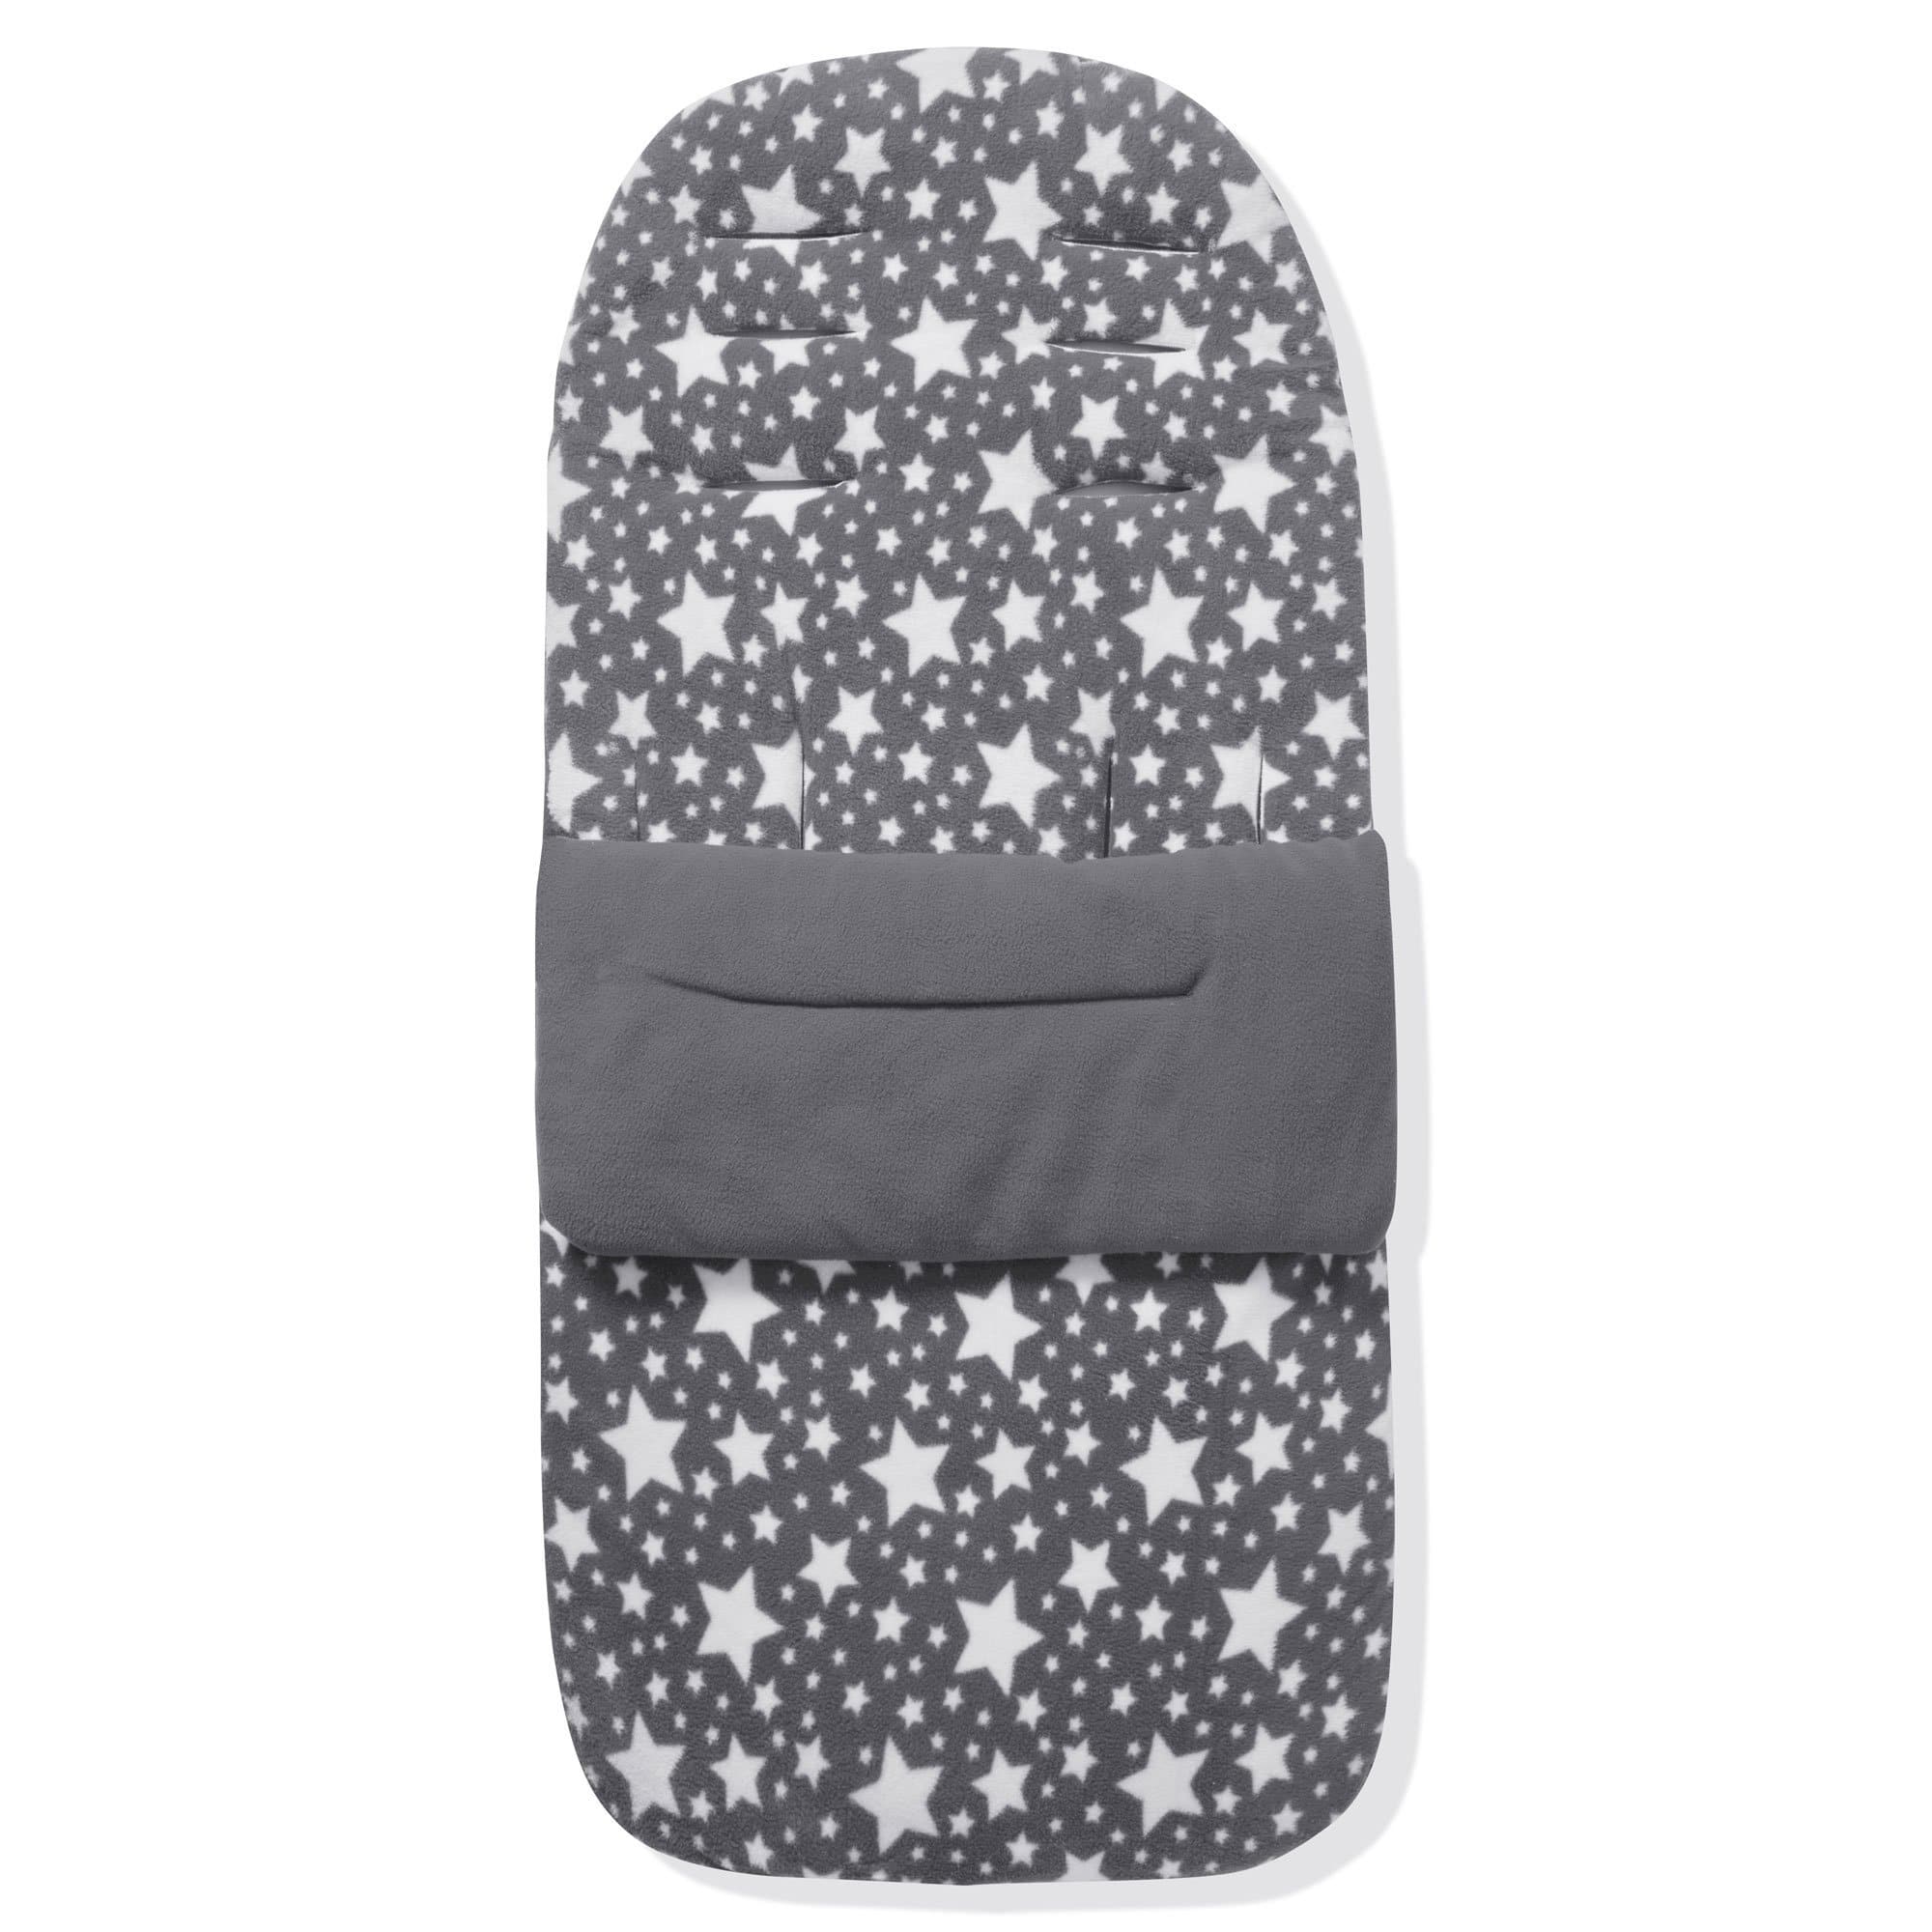 Fleece Footmuff / Cosy Toes Compatible with Zooper - Grey Star / Fits All Models | For Your Little One